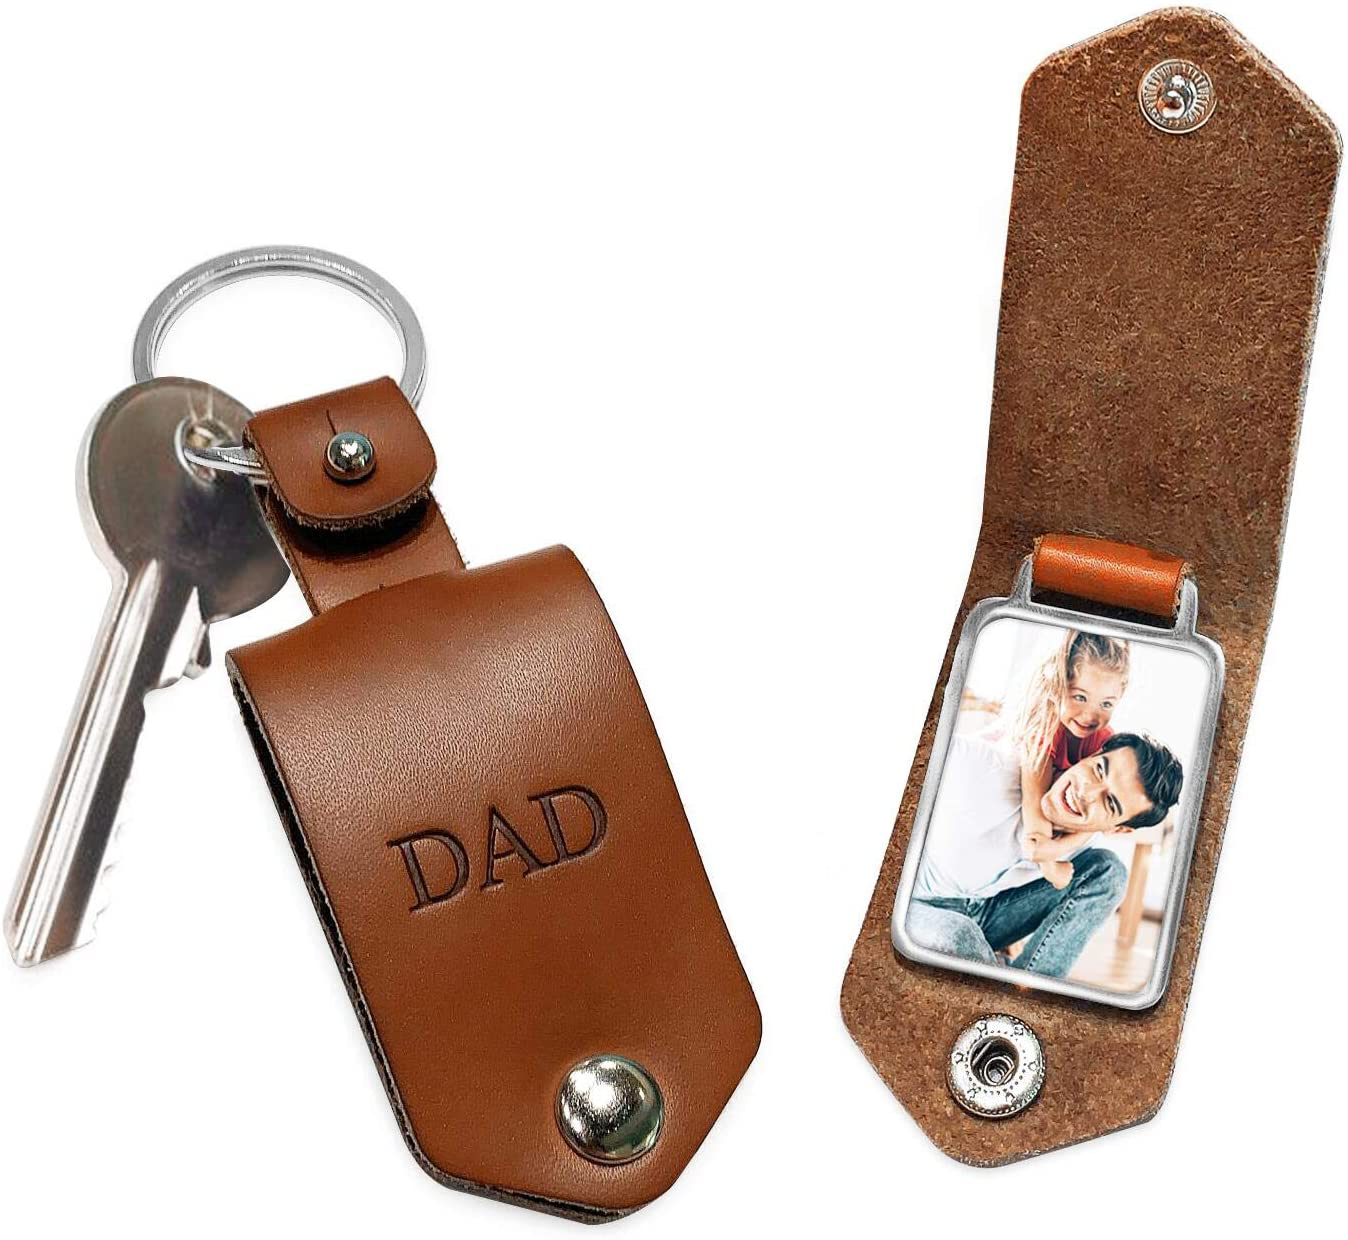 Dad Christmas Gifts - You Will Always Be My Hero Leather Photo Keychain - Dad Gifts from Daughter Son Wife - Personalized Present for Papa Birthday Fathers Day